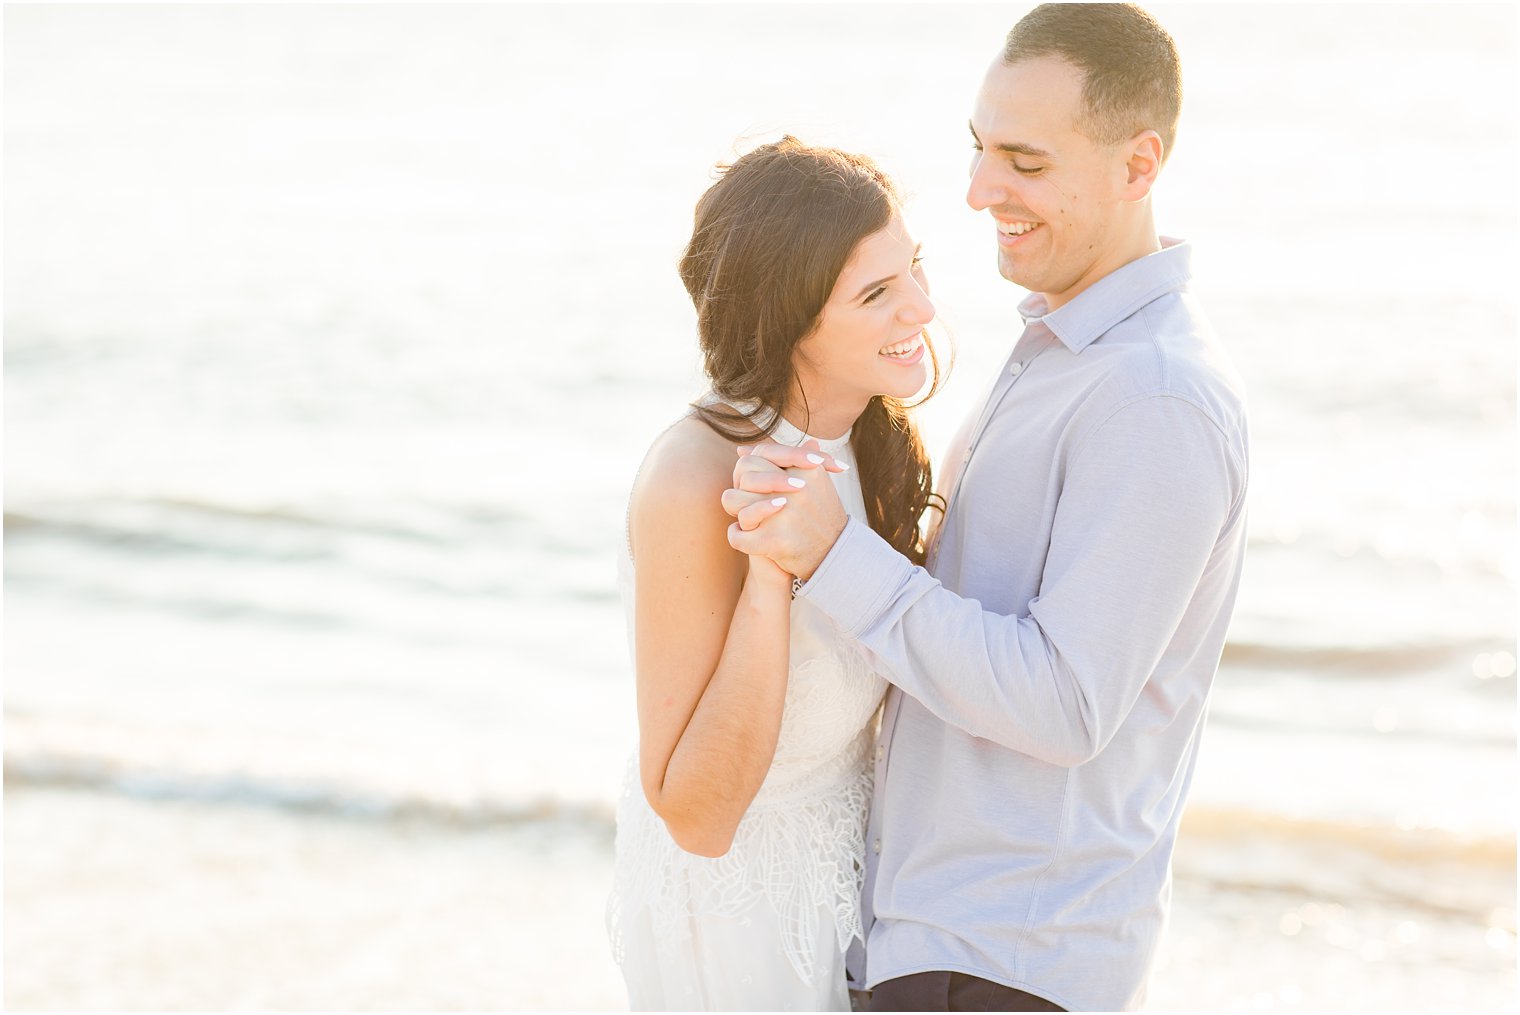 Happily engaged couple at Sunset Beach 